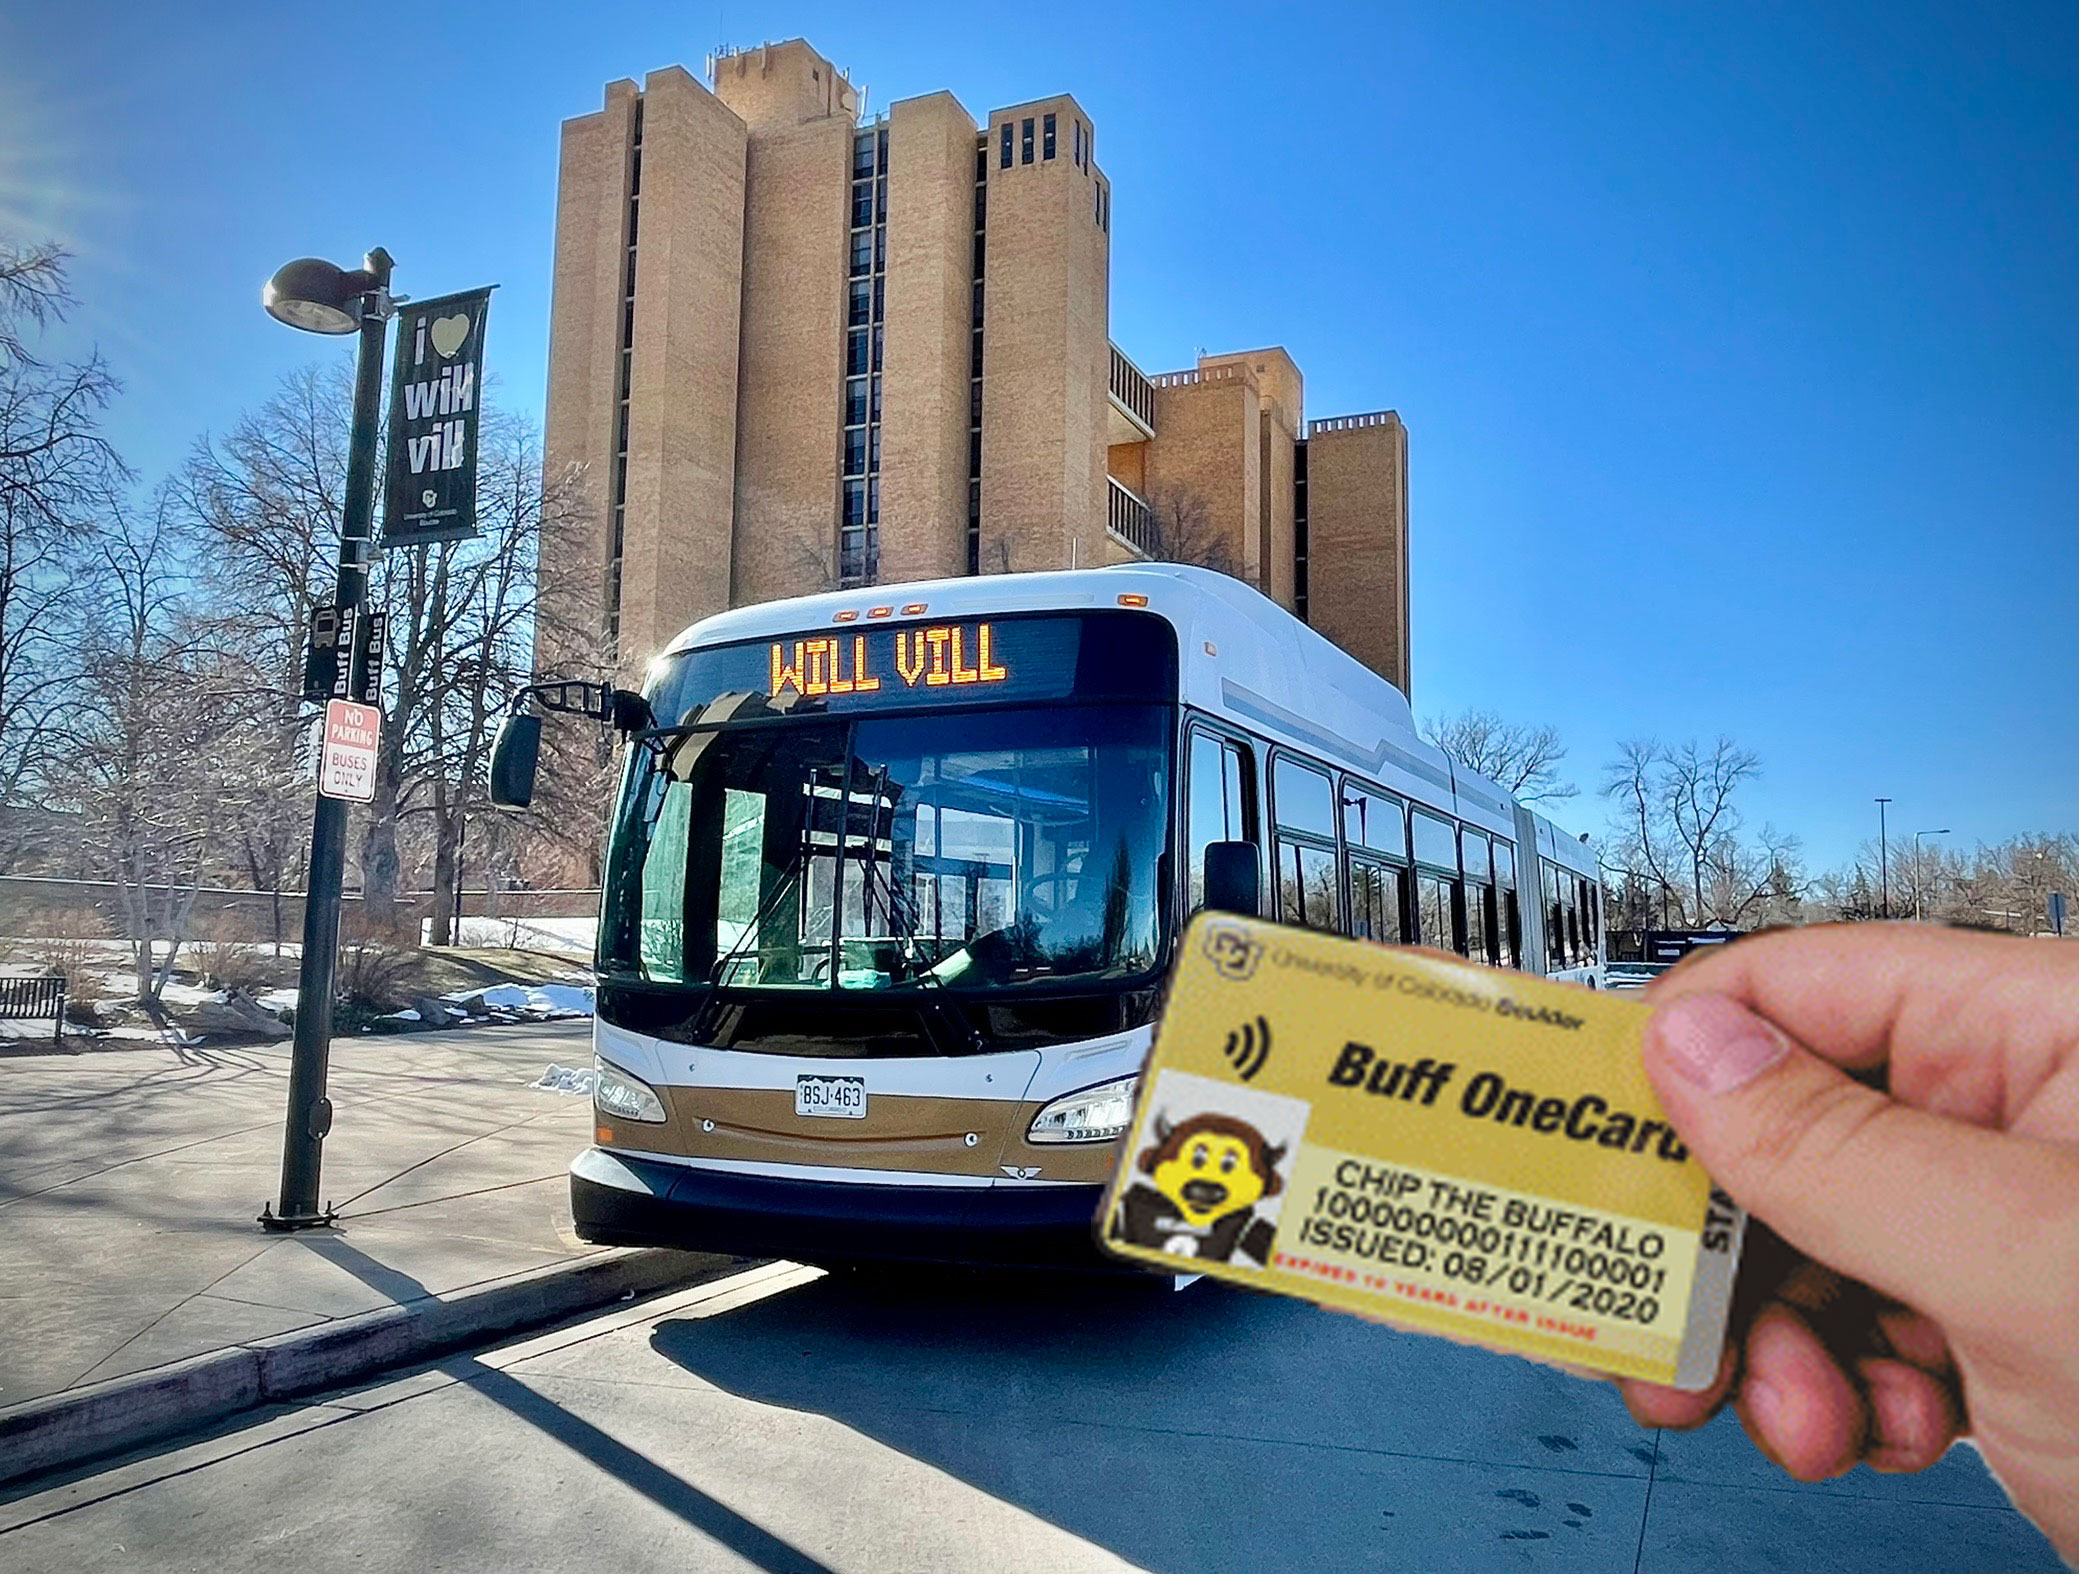 Buff OneCard being held up in front of a bus